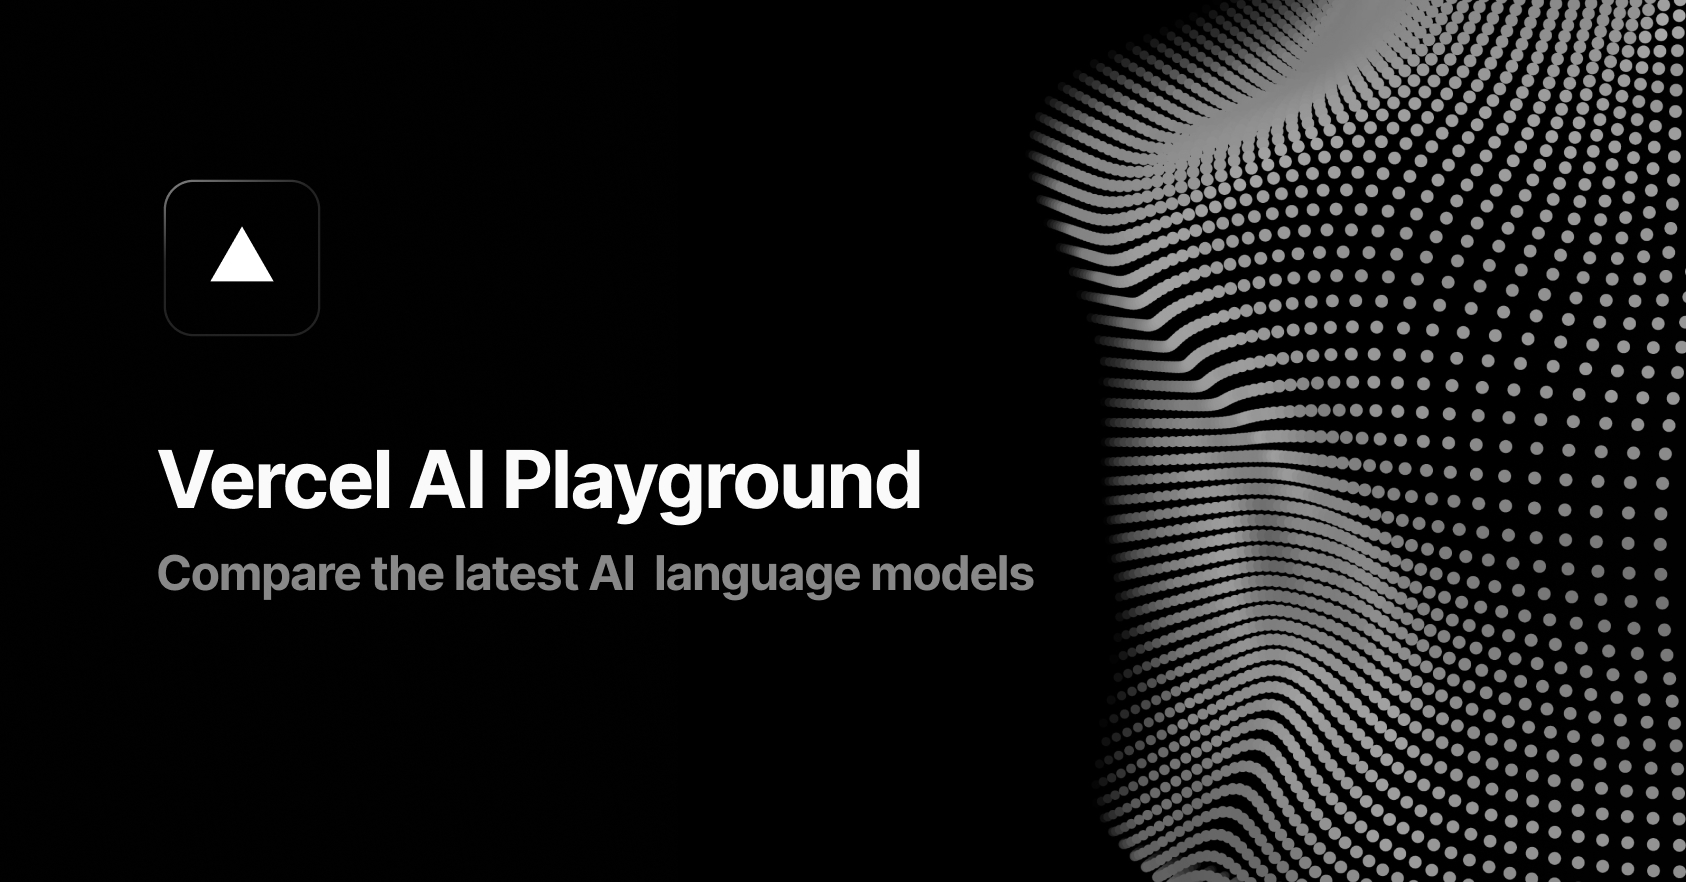 Vercel AI Playground - A tool to compare language models